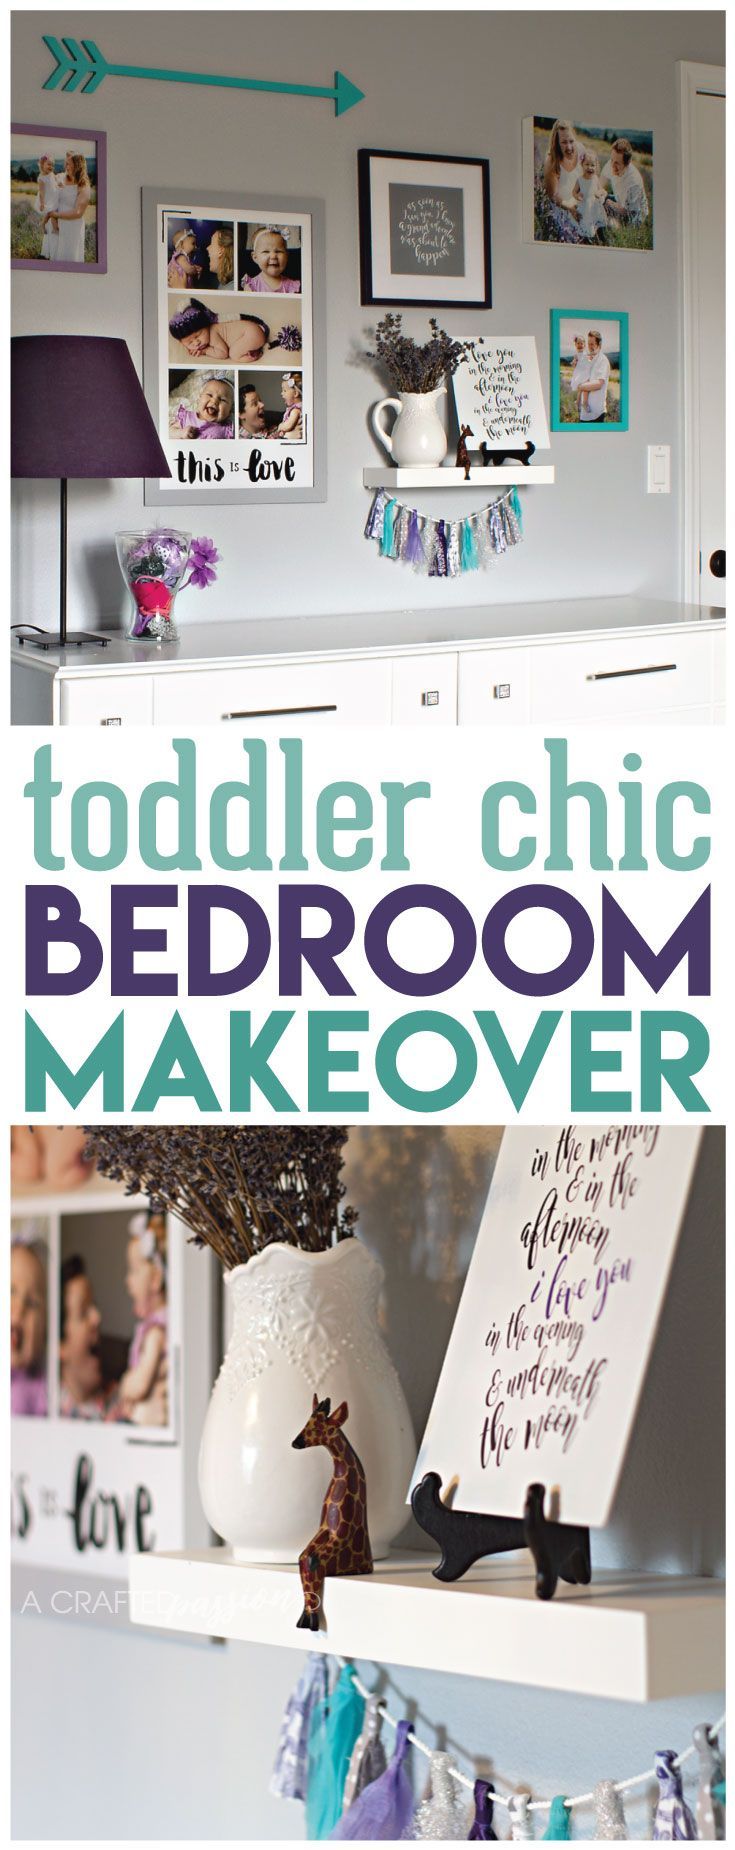 A Cute Toddler Girl Bedroom with Many DIY Ideas